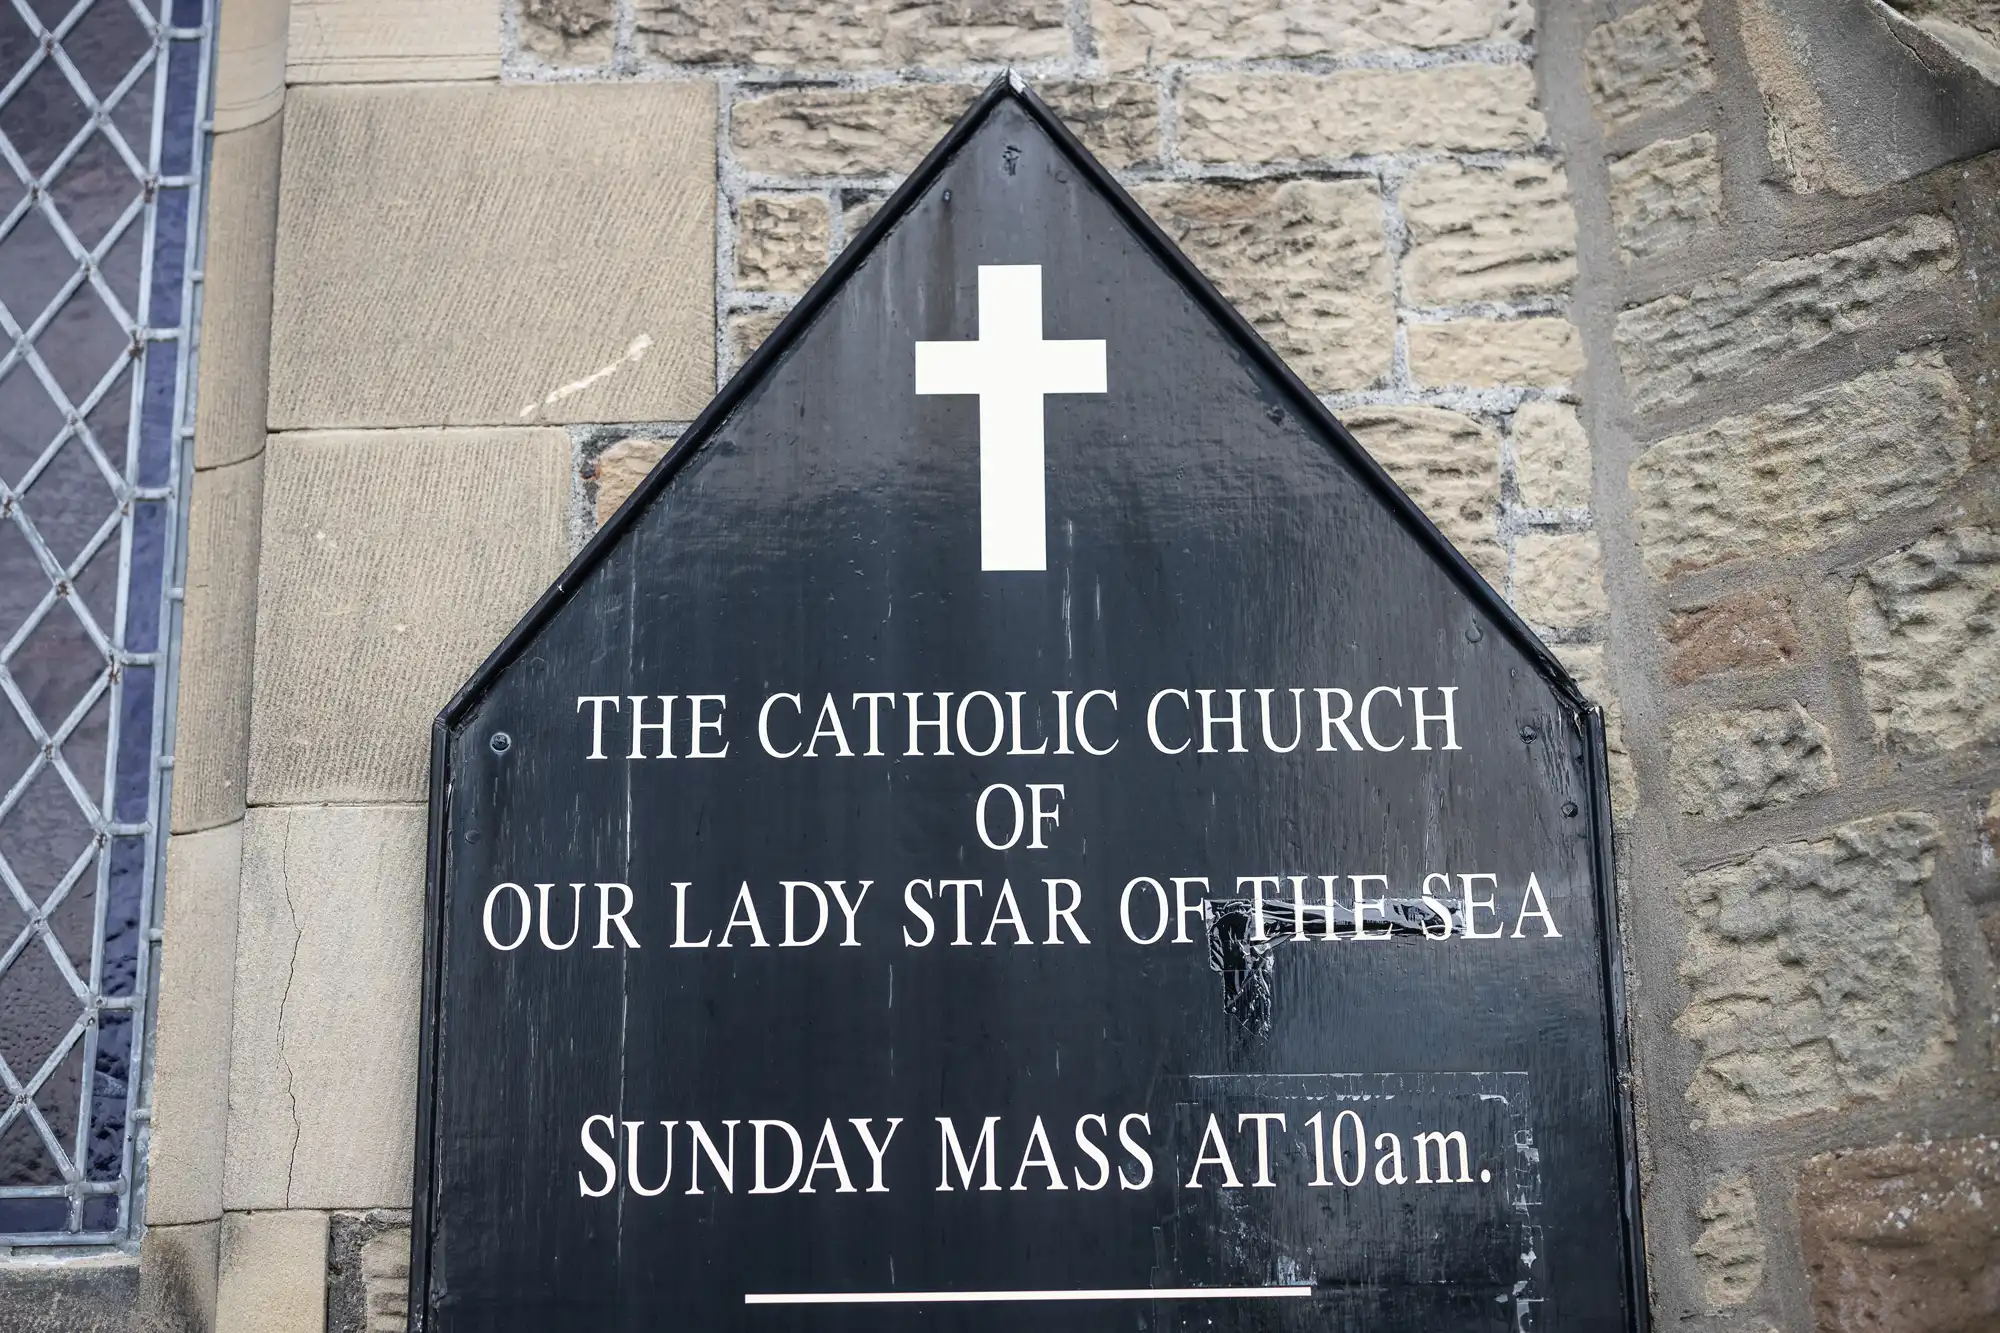 Black triangular sign with white text "The Catholic Church of Our Lady Star of the Sea - Sunday Mass at 10am." with a white cross above the text, mounted on a stone wall.